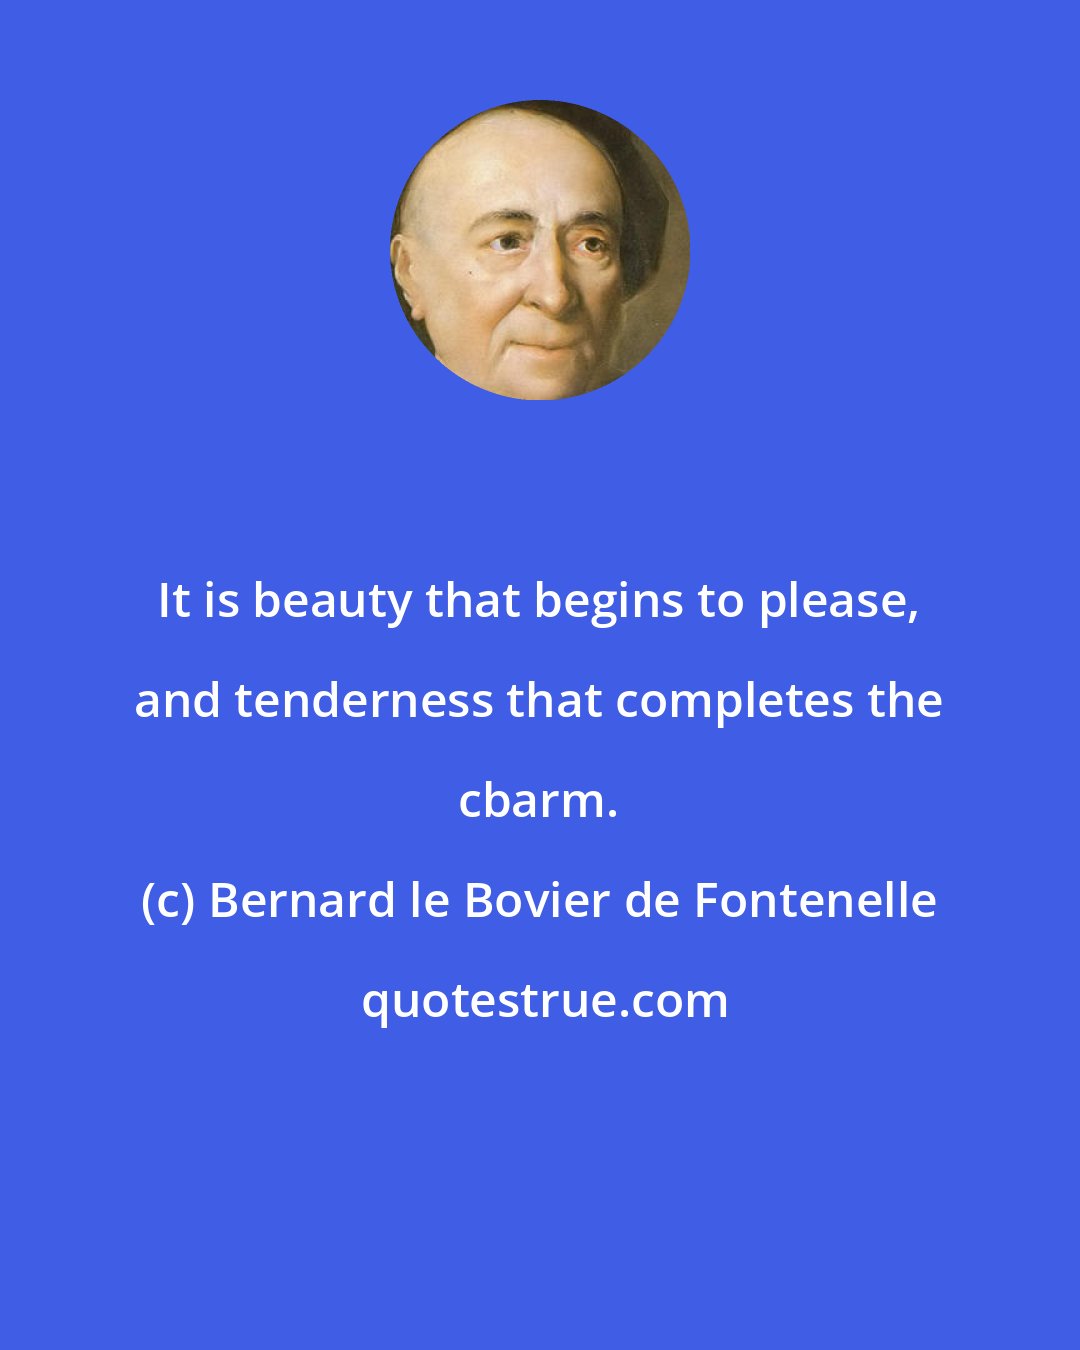 Bernard le Bovier de Fontenelle: It is beauty that begins to please, and tenderness that completes the cbarm.